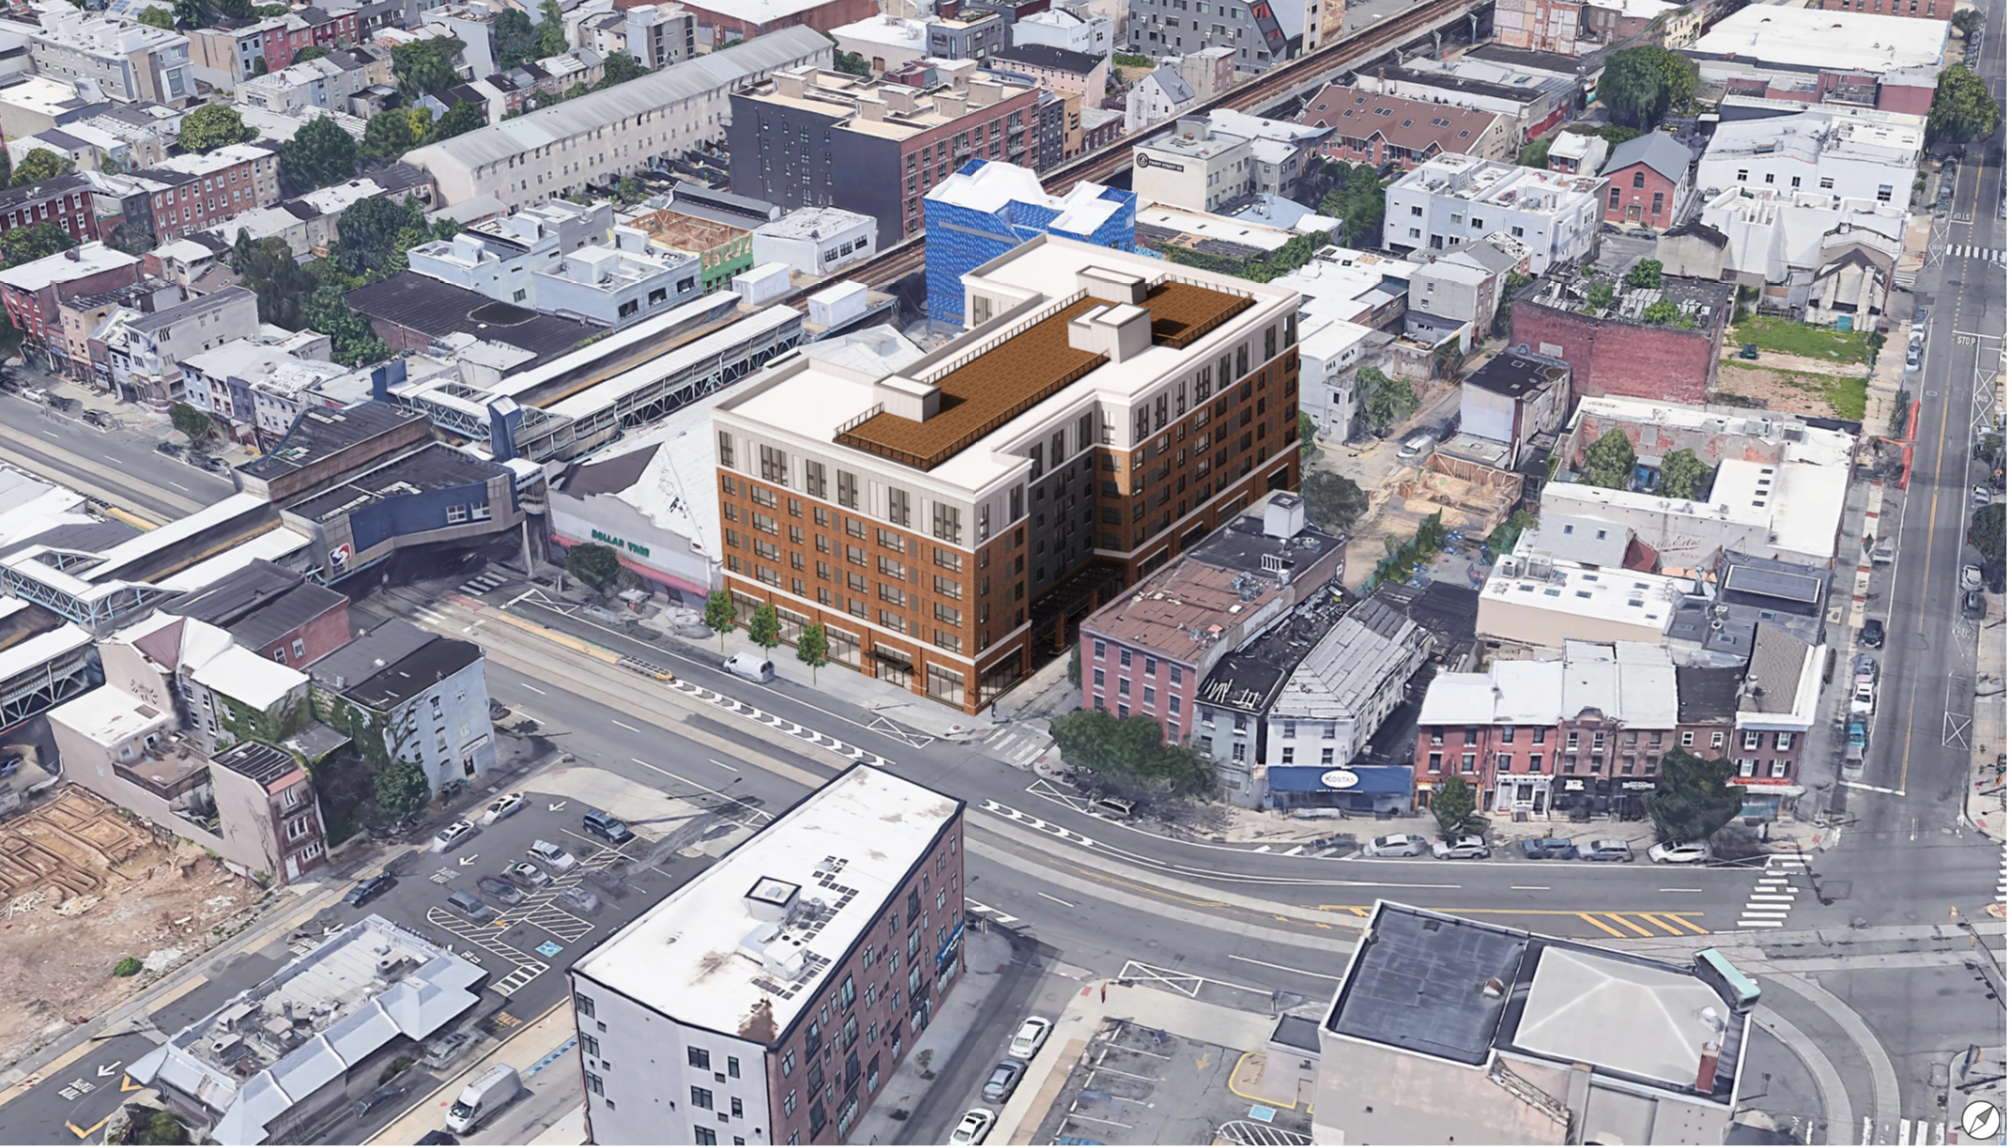 Rendering of 23 West Girard Avenue. Credit: JKRP Architects.